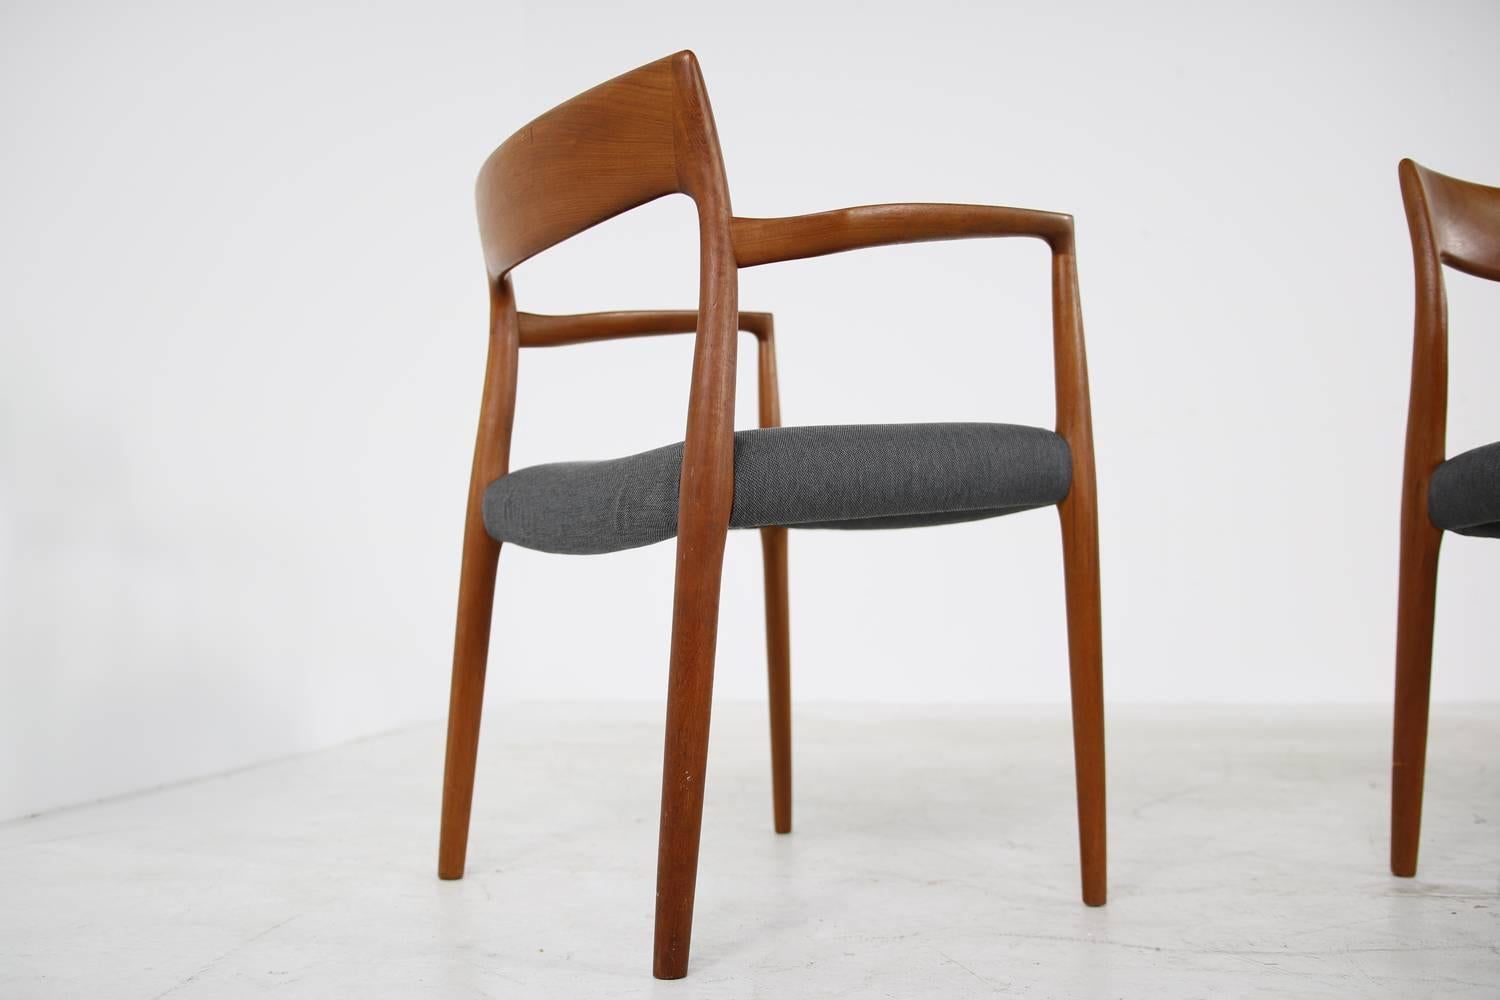 Mid-20th Century 1960s Danish Teak Dining Room Chairs by Niels O. Moller Mod. 77 and Mod. 57